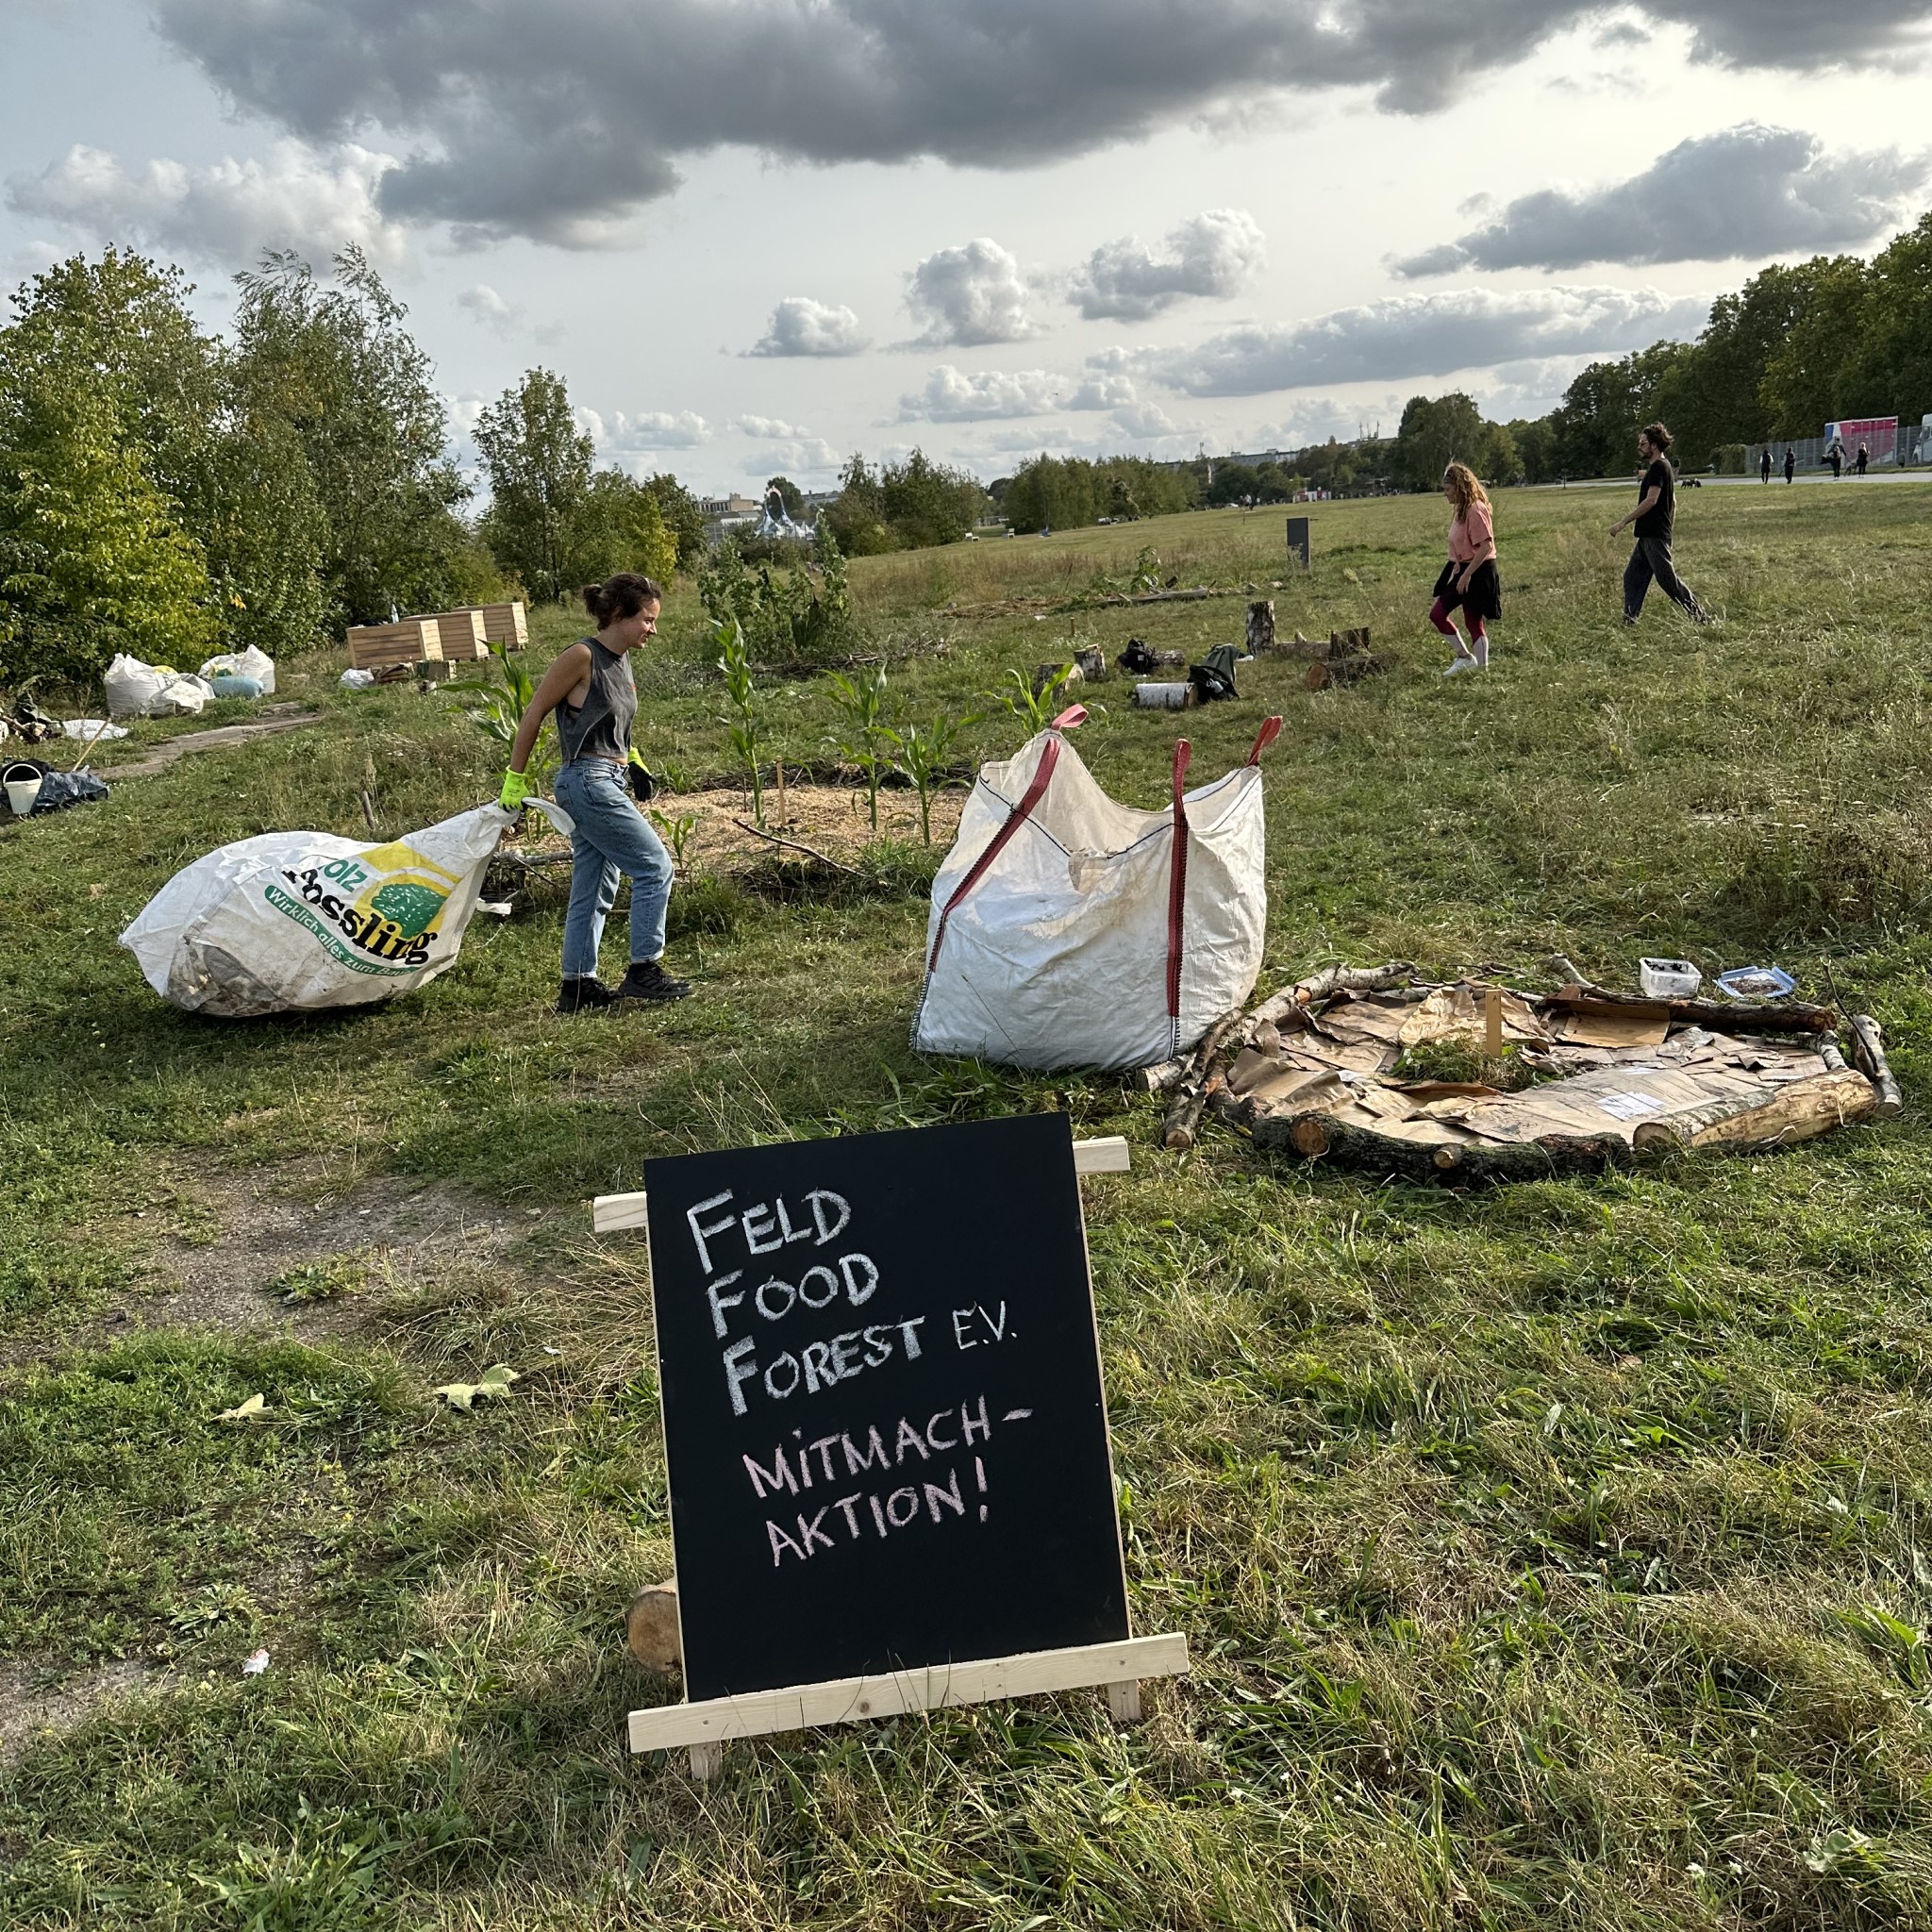 People building beds in a garden. A sign saying "Feld Food Forest".